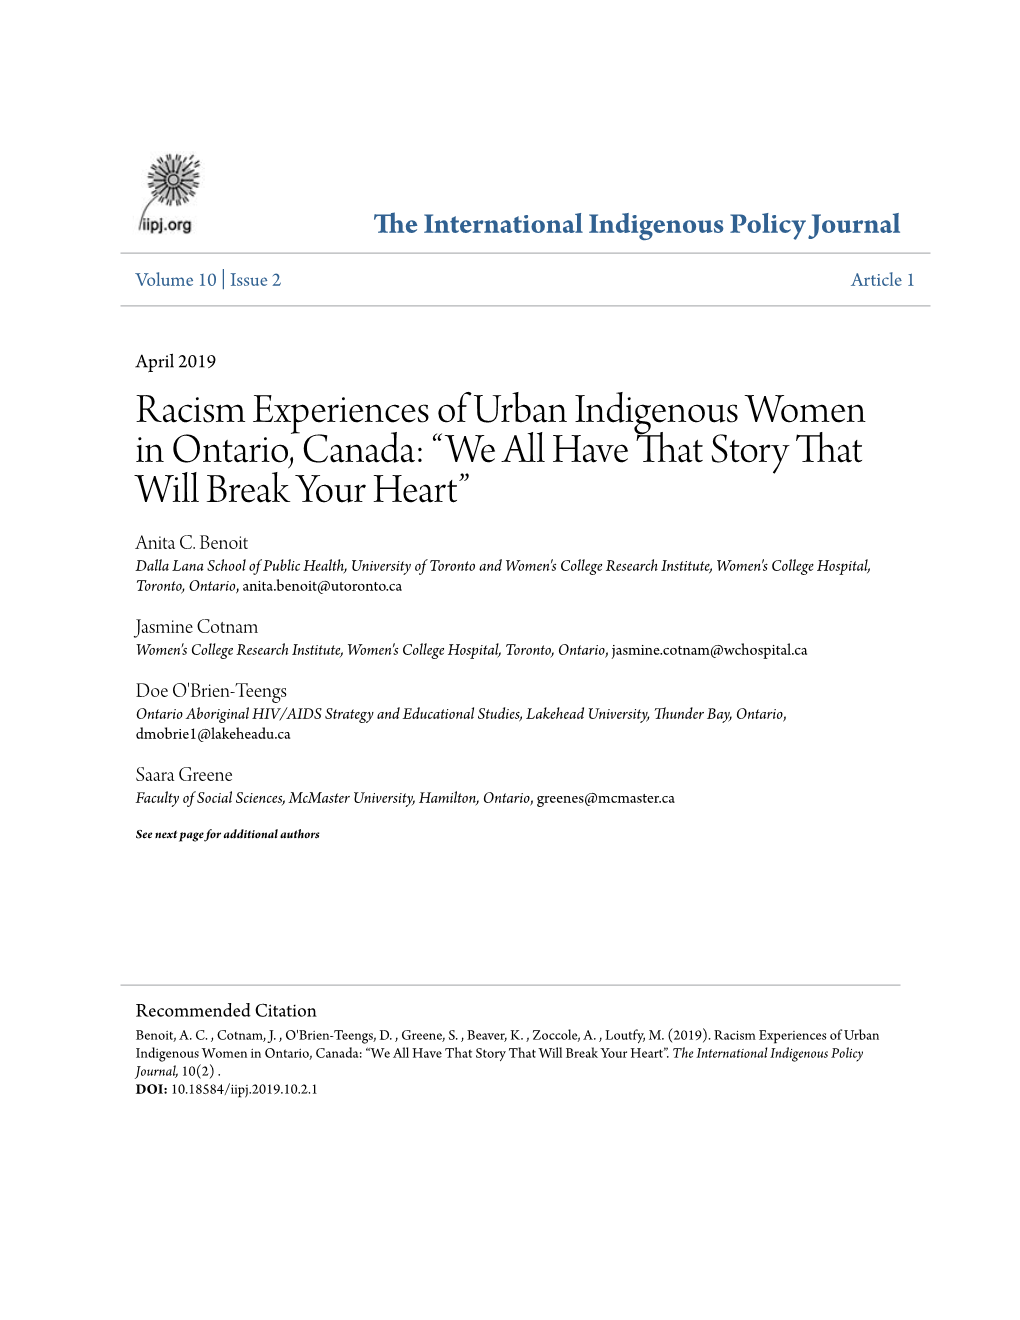 Racism Experiences of Urban Indigenous Women in Ontario, Canada: “We All Have That Story That Will Break Your Heart” Anita C